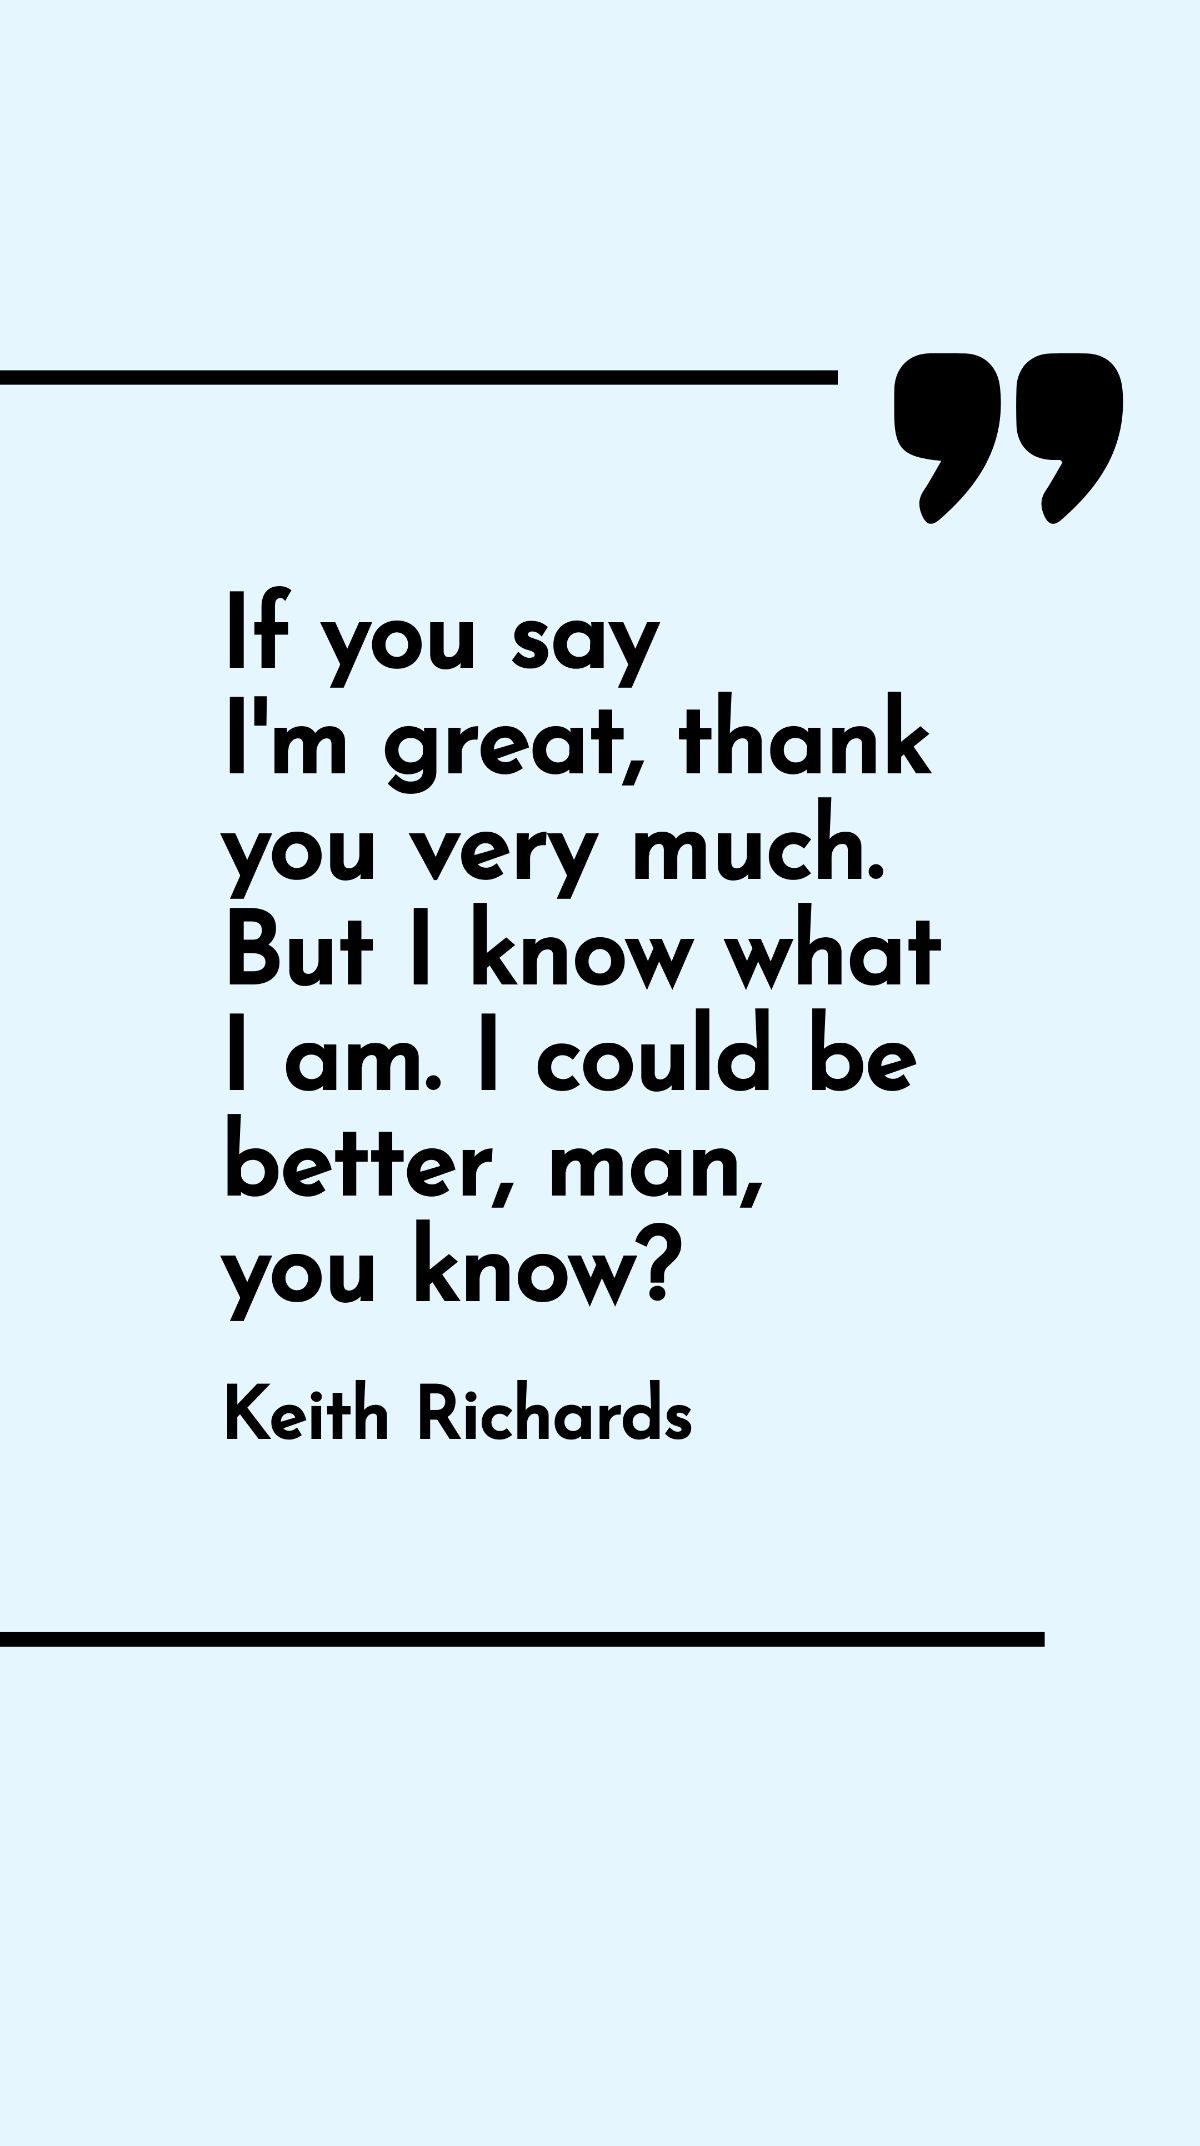 Keith Richards - If you say I'm great, thank you very much. But I know what I am. I could be better, man, you know?